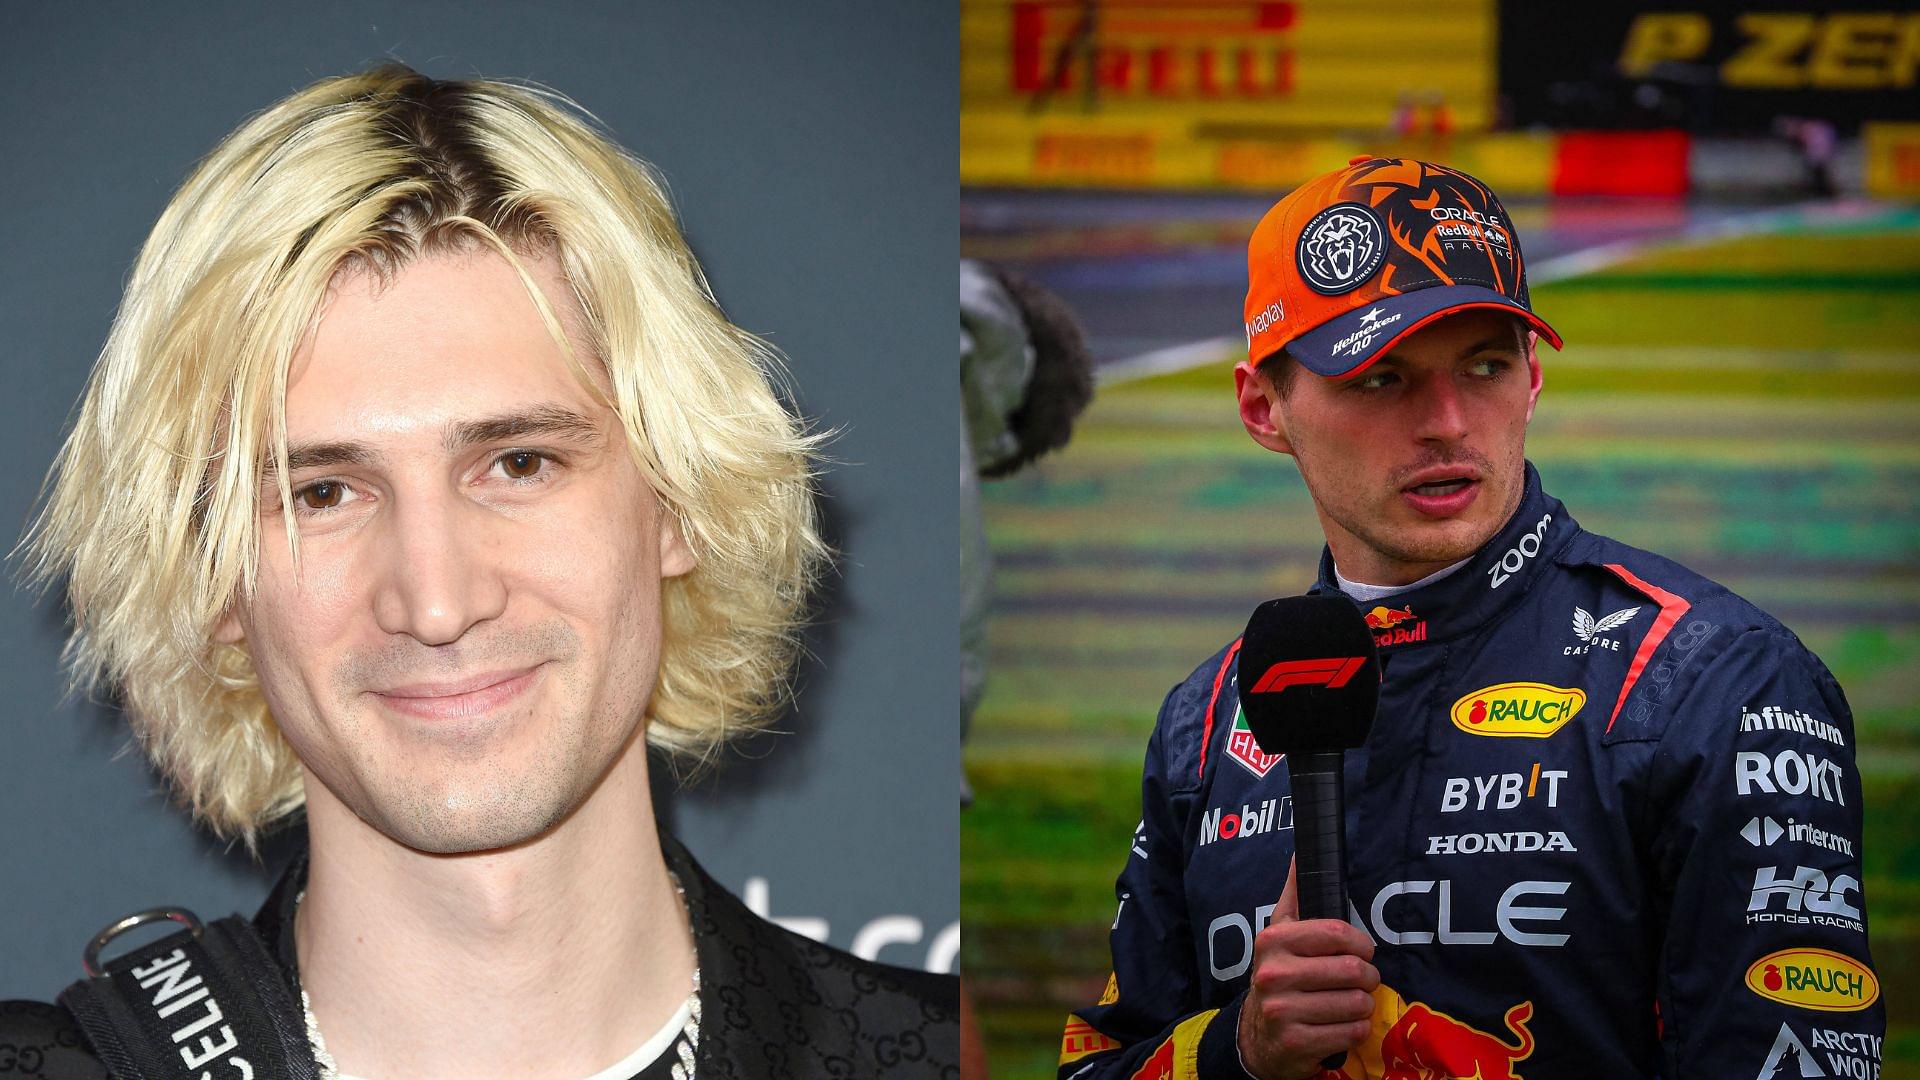 "F*cking Bum" Max Verstappen Has Canadian YouTuber xQc Begging For Change